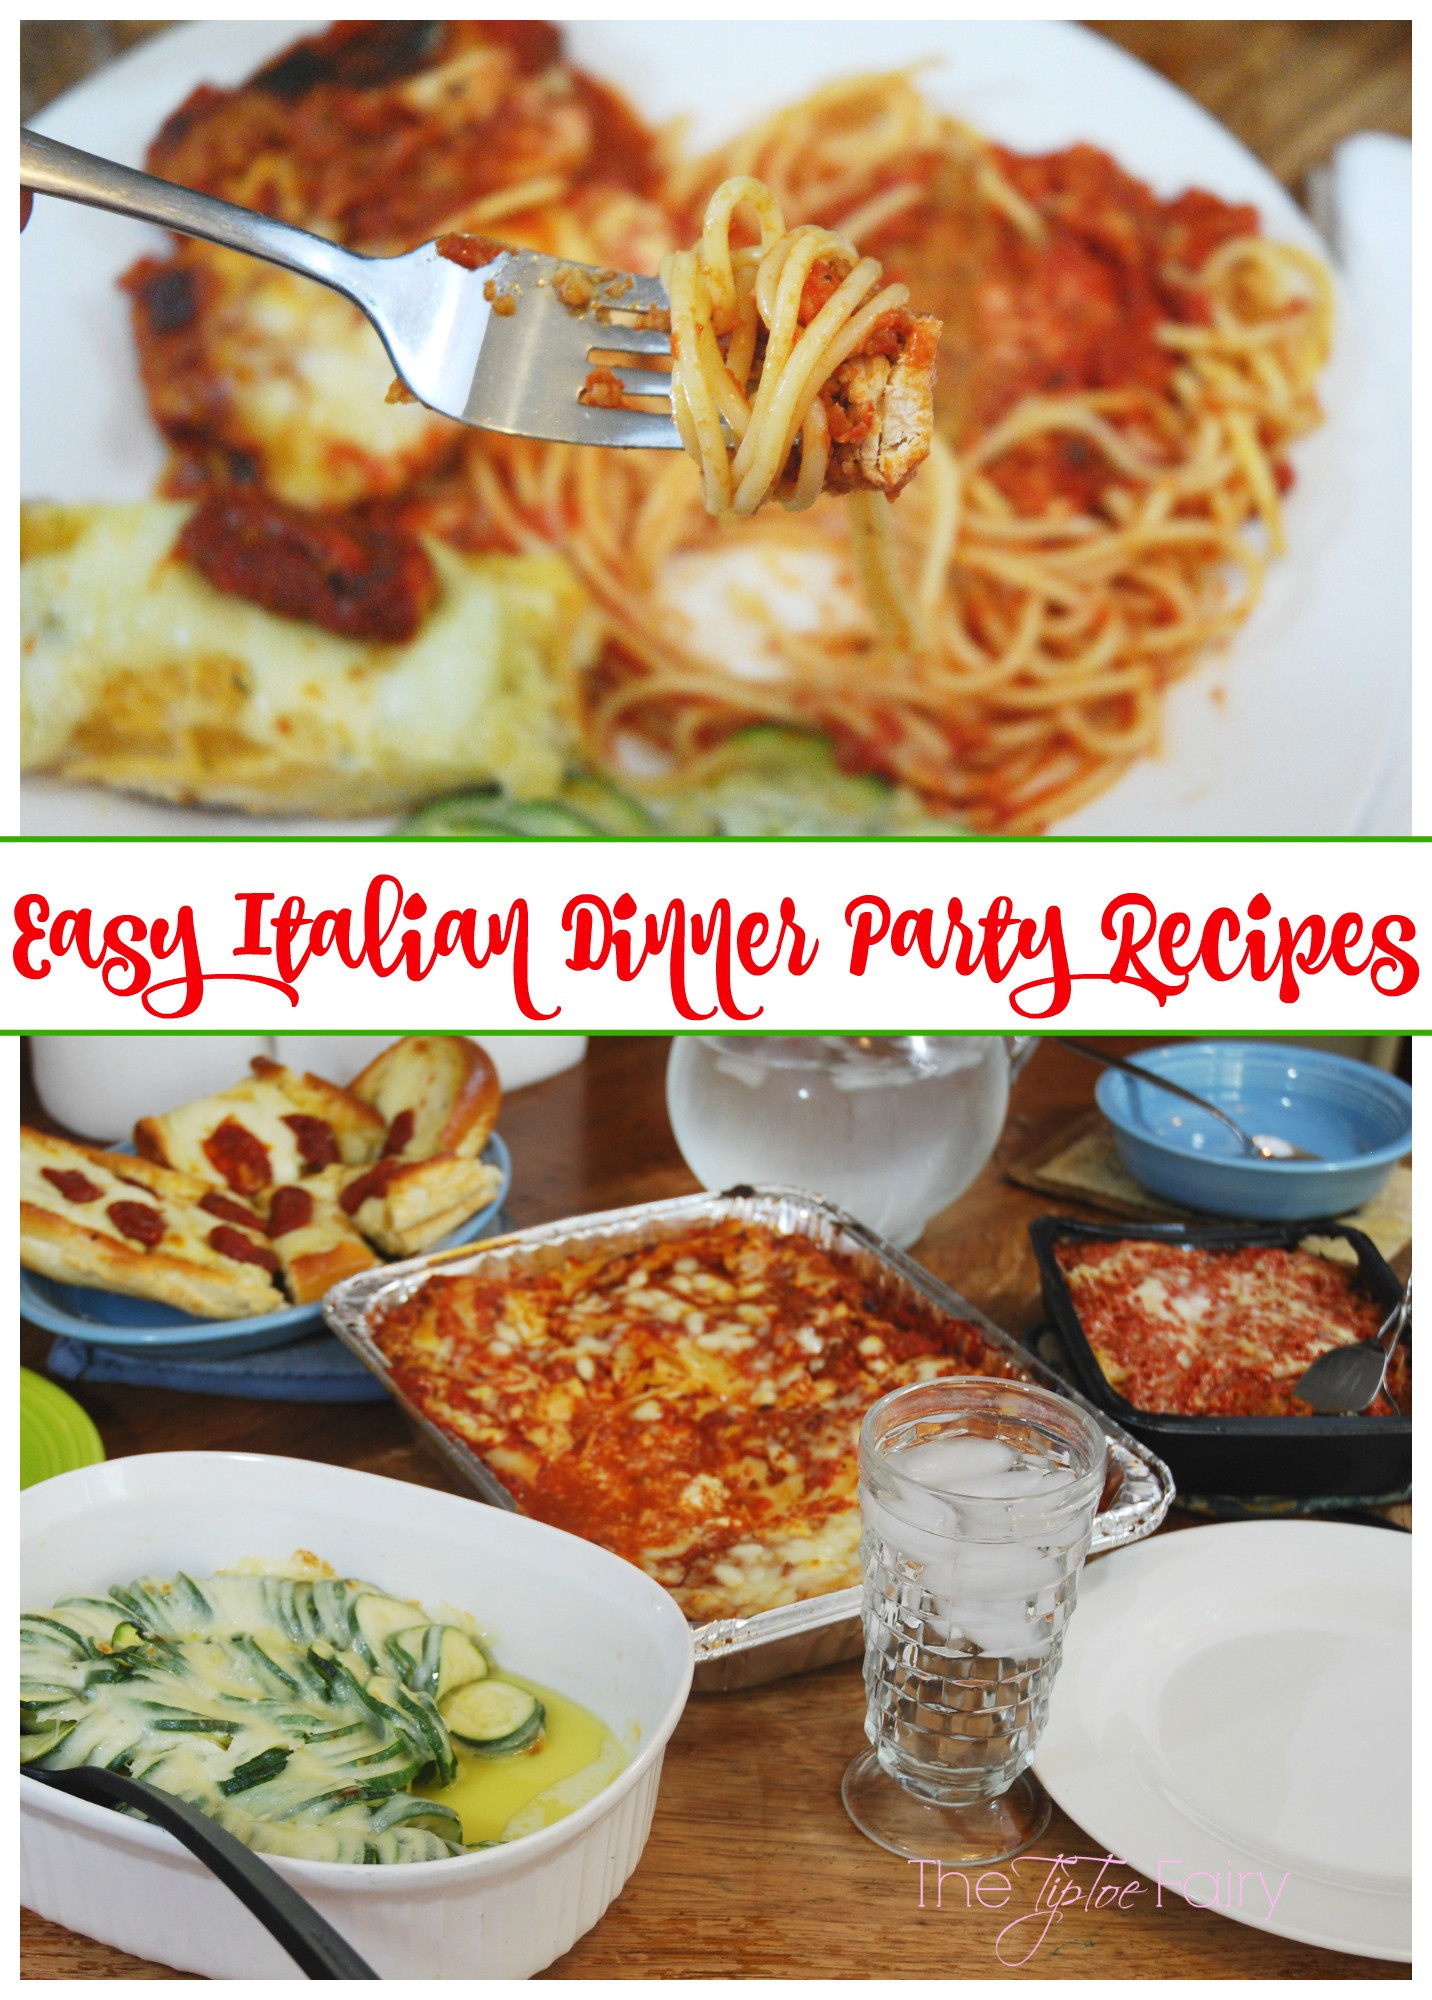 Dinner Party Menu Ideas For 12
 Italian Dinner Party Recipes